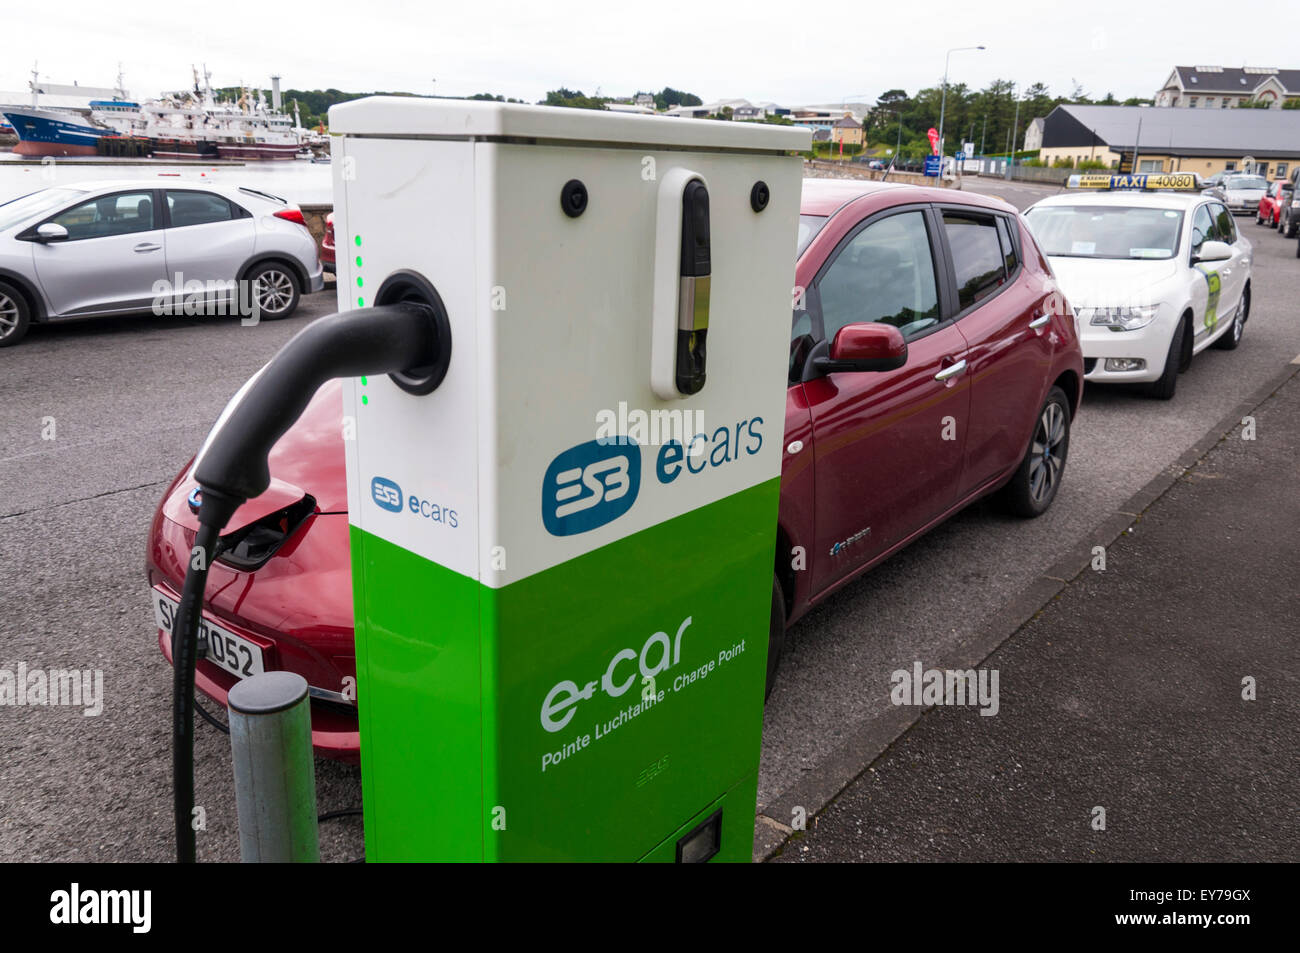 ESB e cars ecars charge point in Killybegs, County Donegal, Ireland Stock Photo